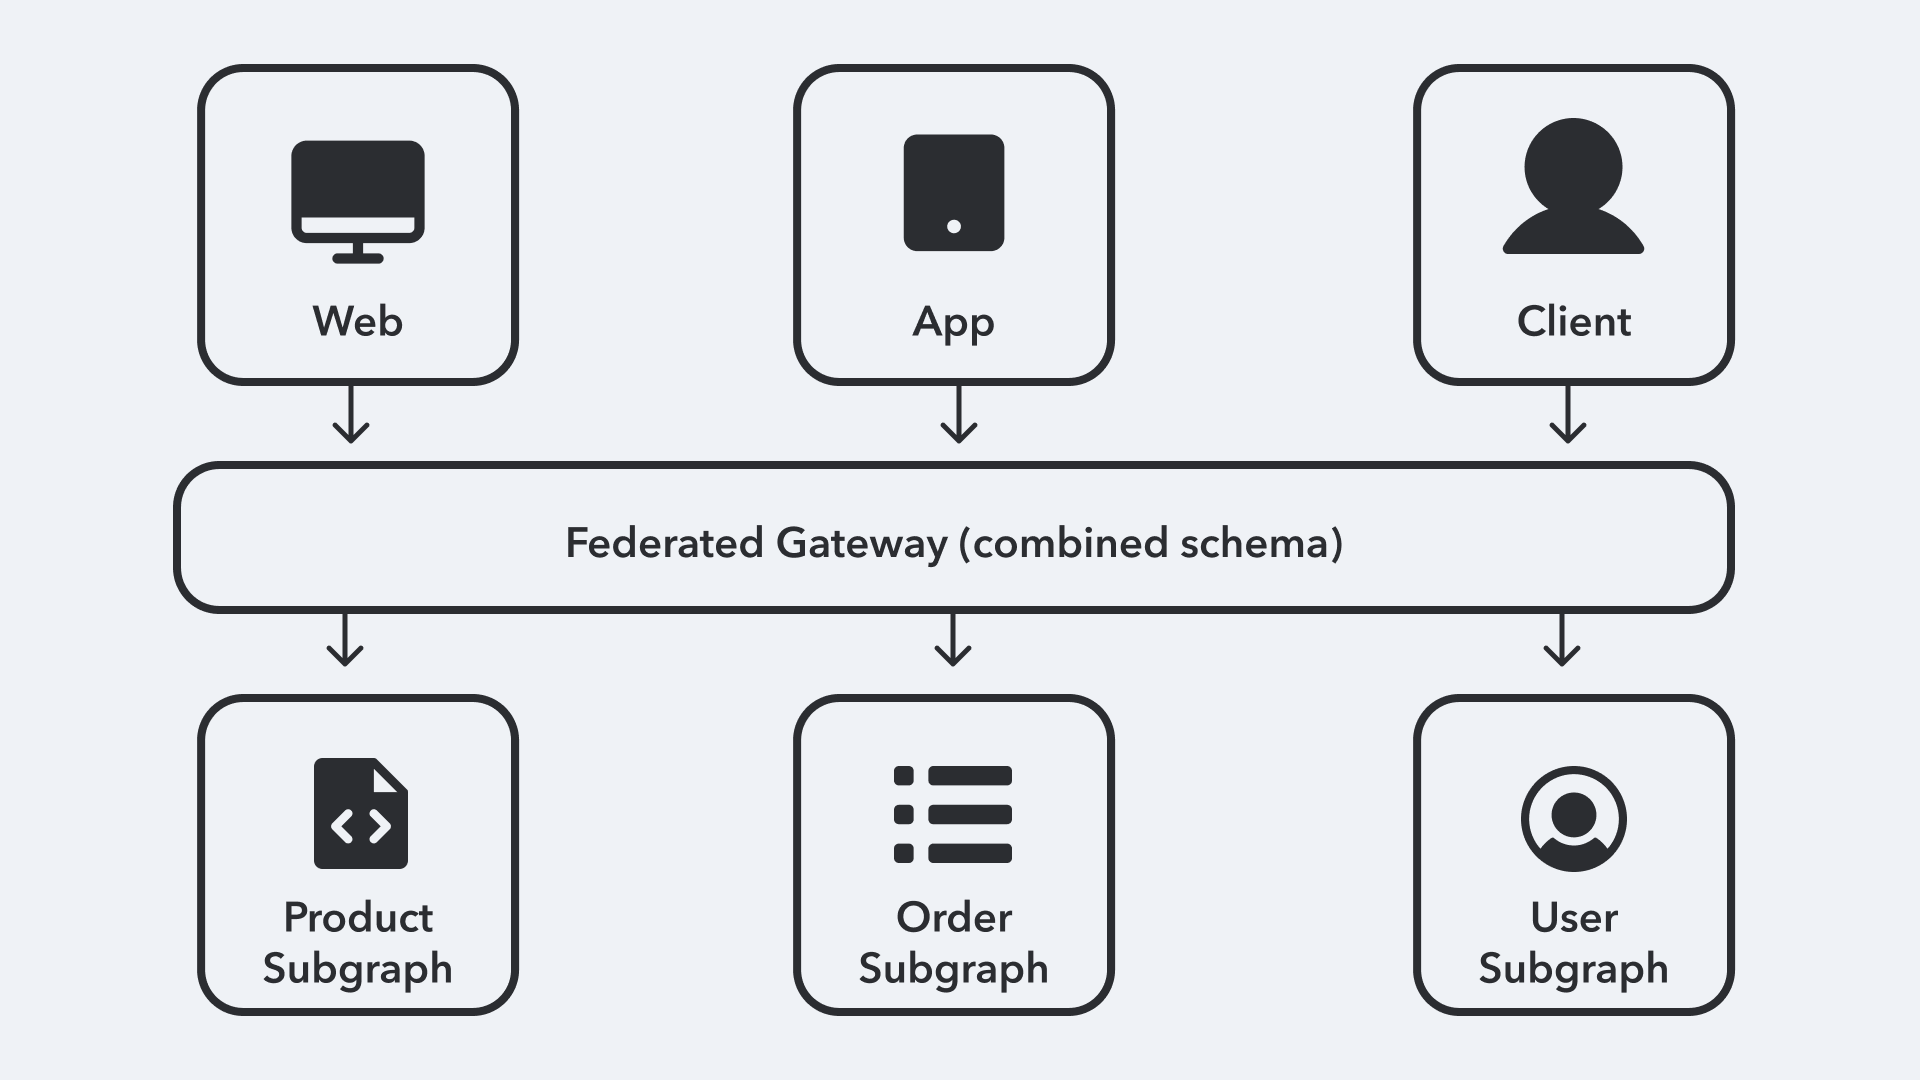 Based on the combined schema, requests can be routed by the gateway to the respective subgraphs. These queries can also be run in parallel to improve efficiency.